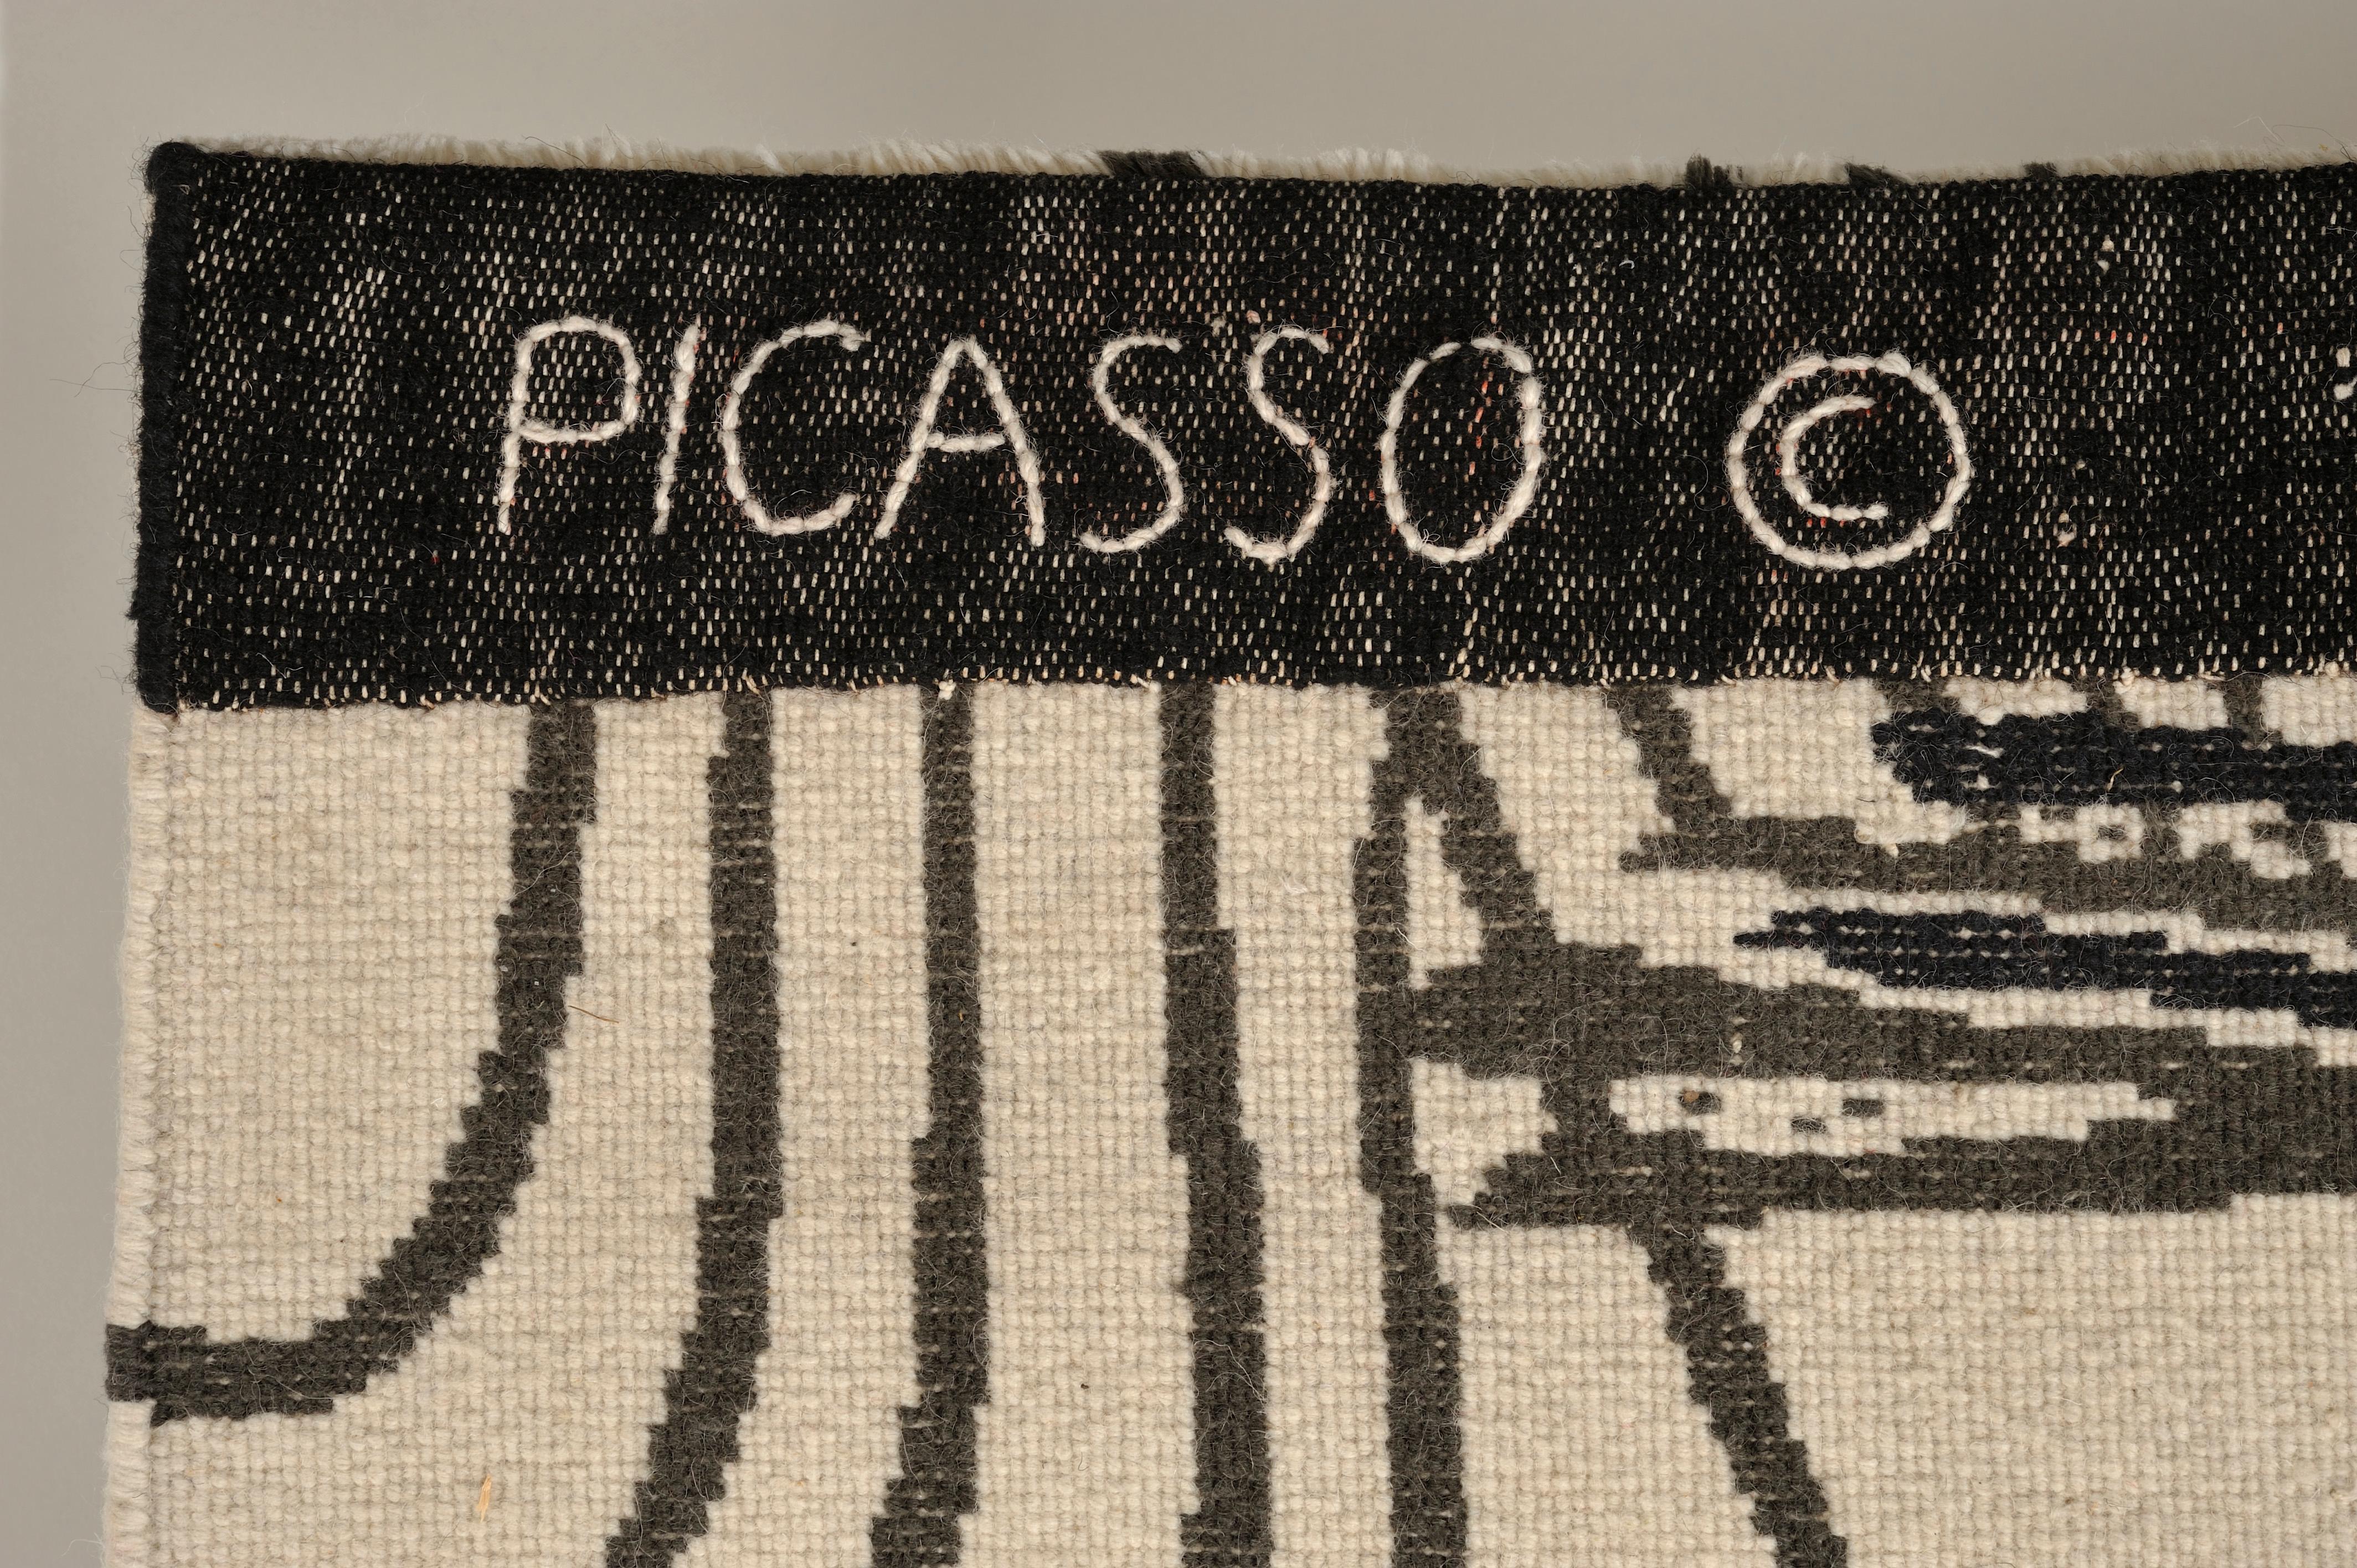 Pablo Picasso
Le Baiser, 1979/1980
Wool Tapestry
Edition of 20
190 x 140 cm (74.8 x 55.1 in.)
Limited edition of 20

Textile Arts
Excellent Condition
Knotted signature ‘Picasso’ on the recto; embroidered inscription ‘Picasso ©’on the